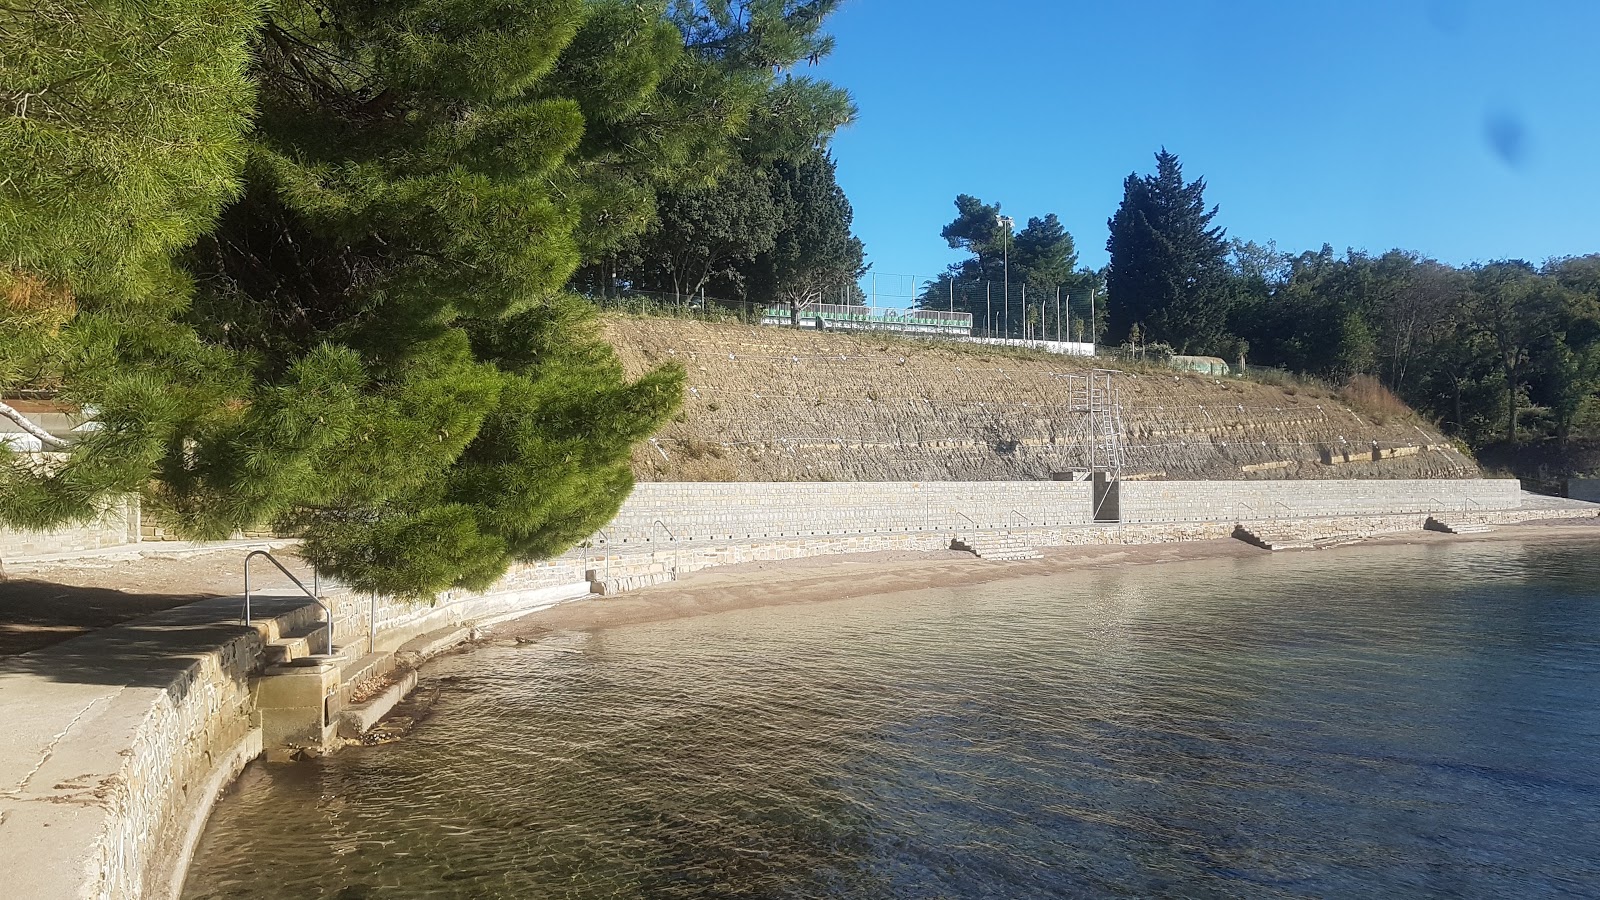 Photo of Debeli rtic beach with concrete cover surface